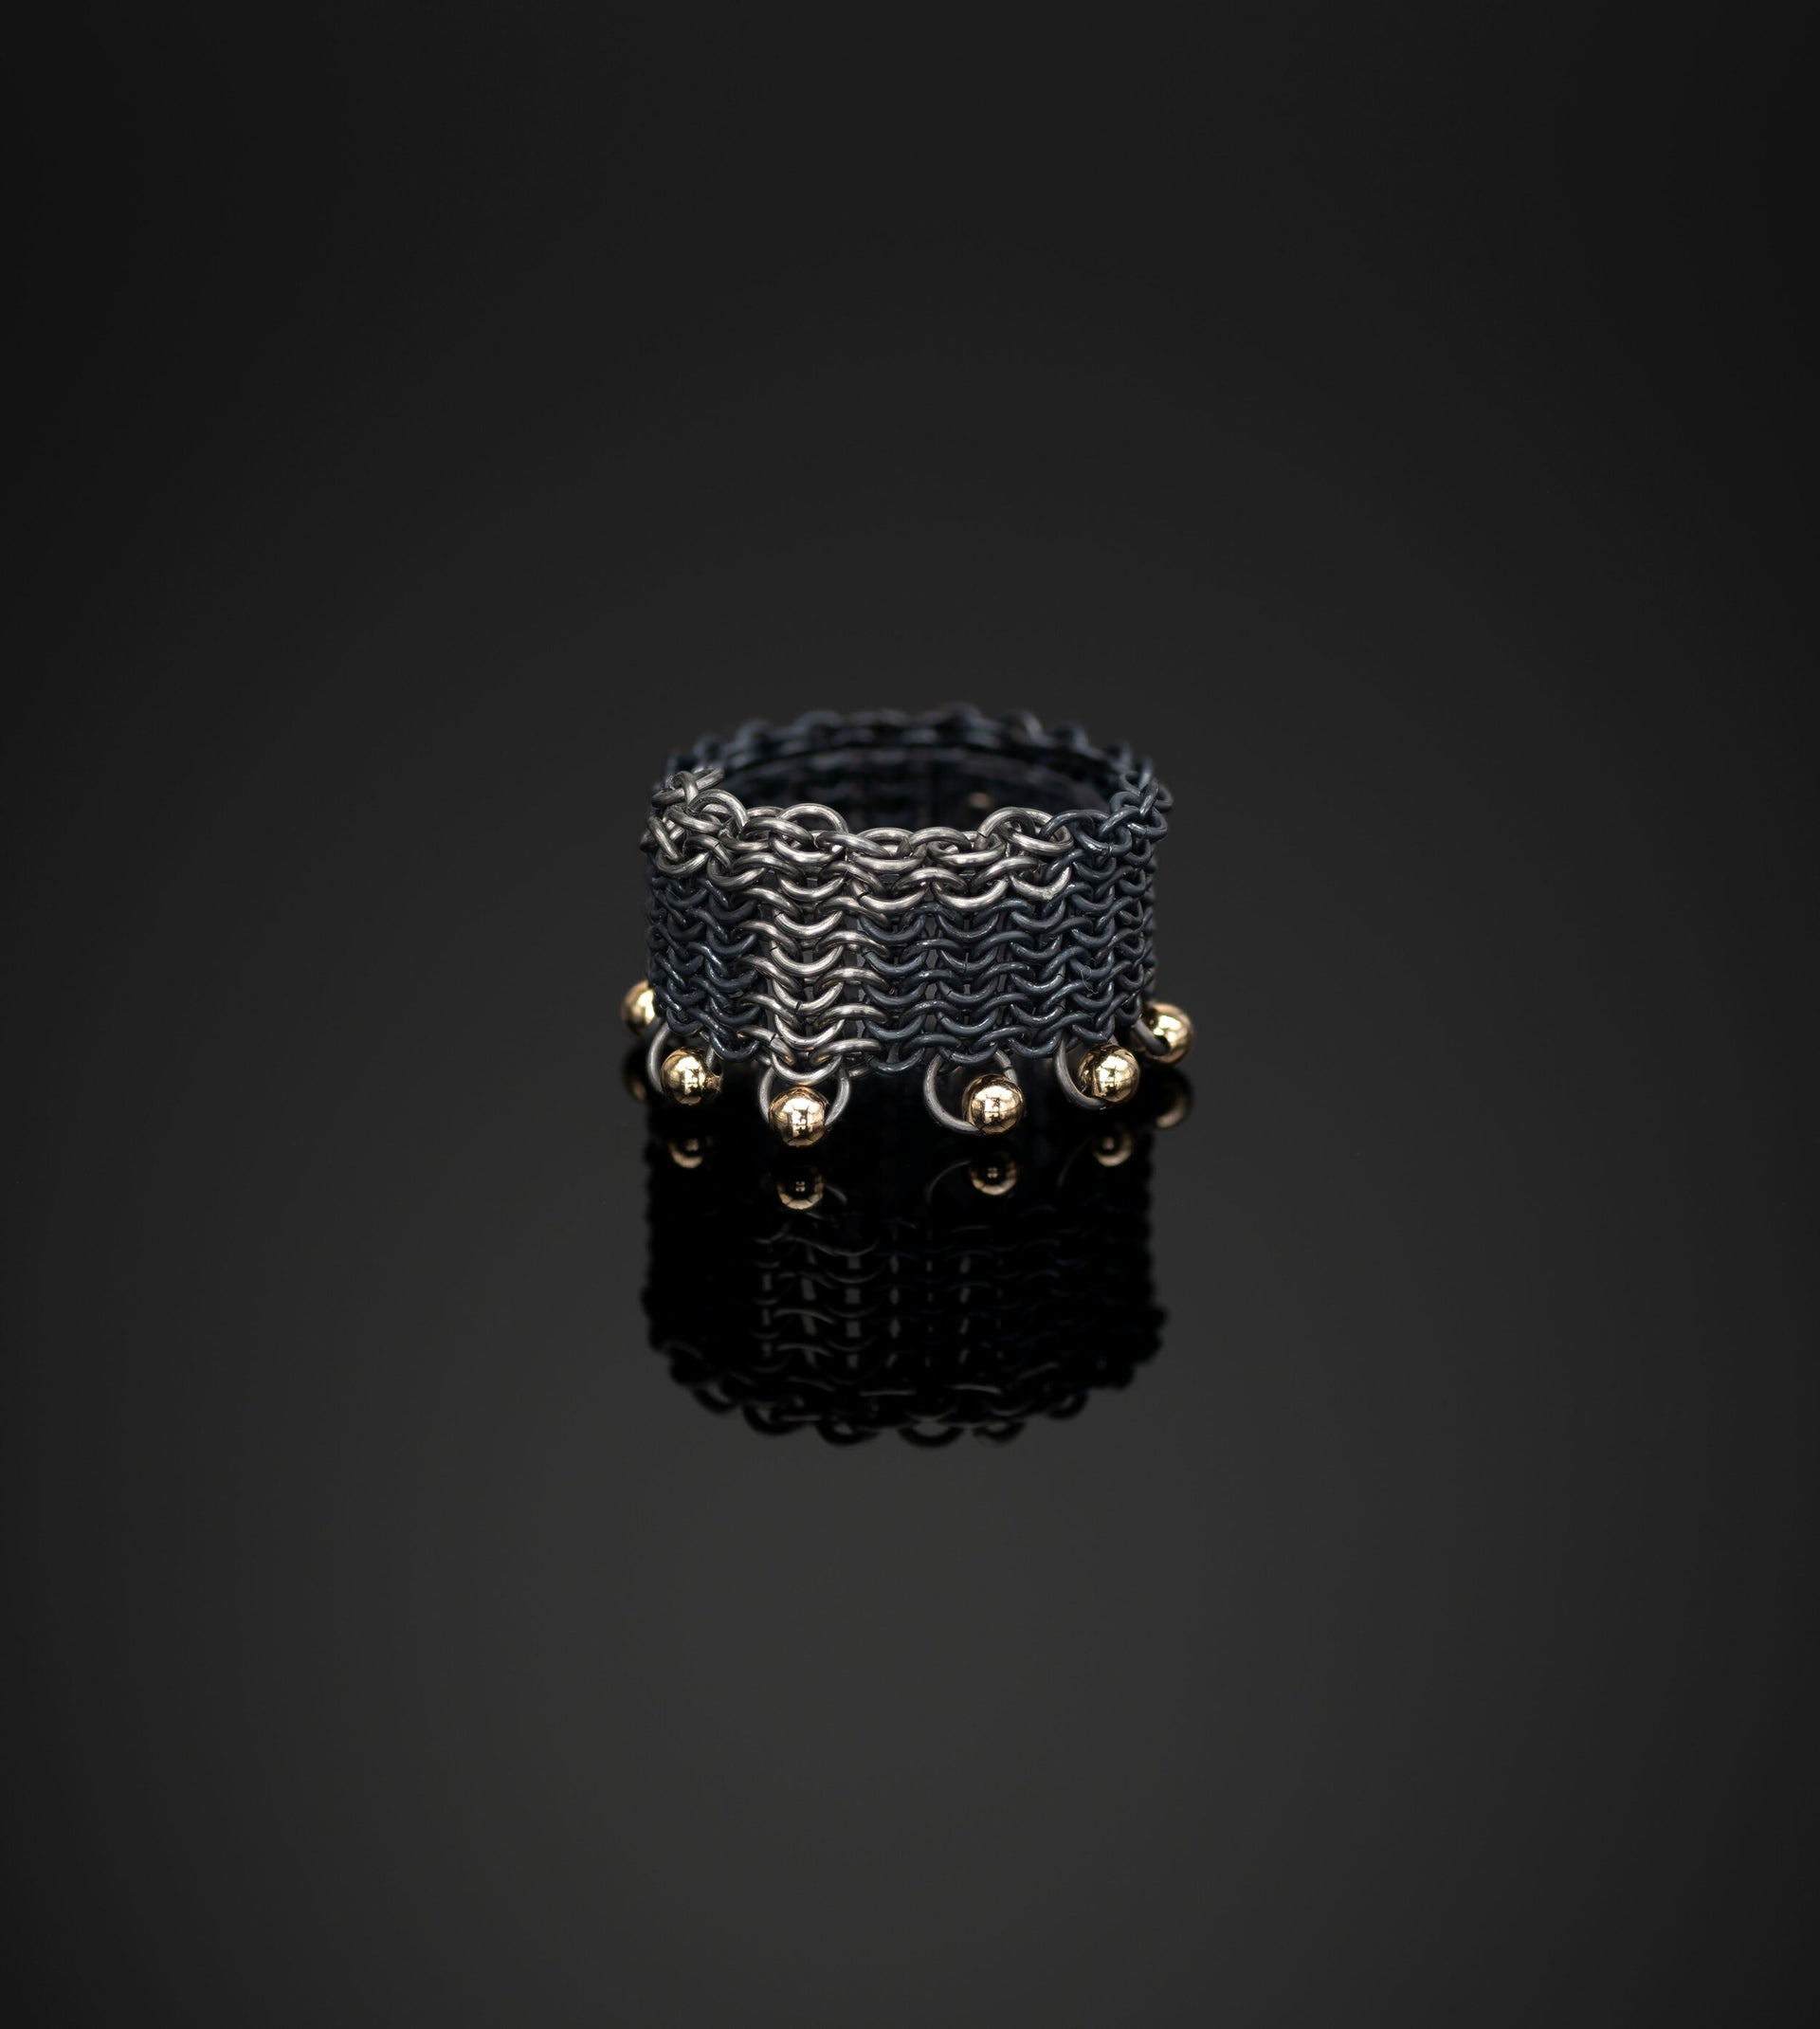 ThunderBolt || ring handmade contemporary chainmail ring handcrafted titanium, recycled oxidised silver and 18ct yellow gold chains by Corrinne Eira Evans